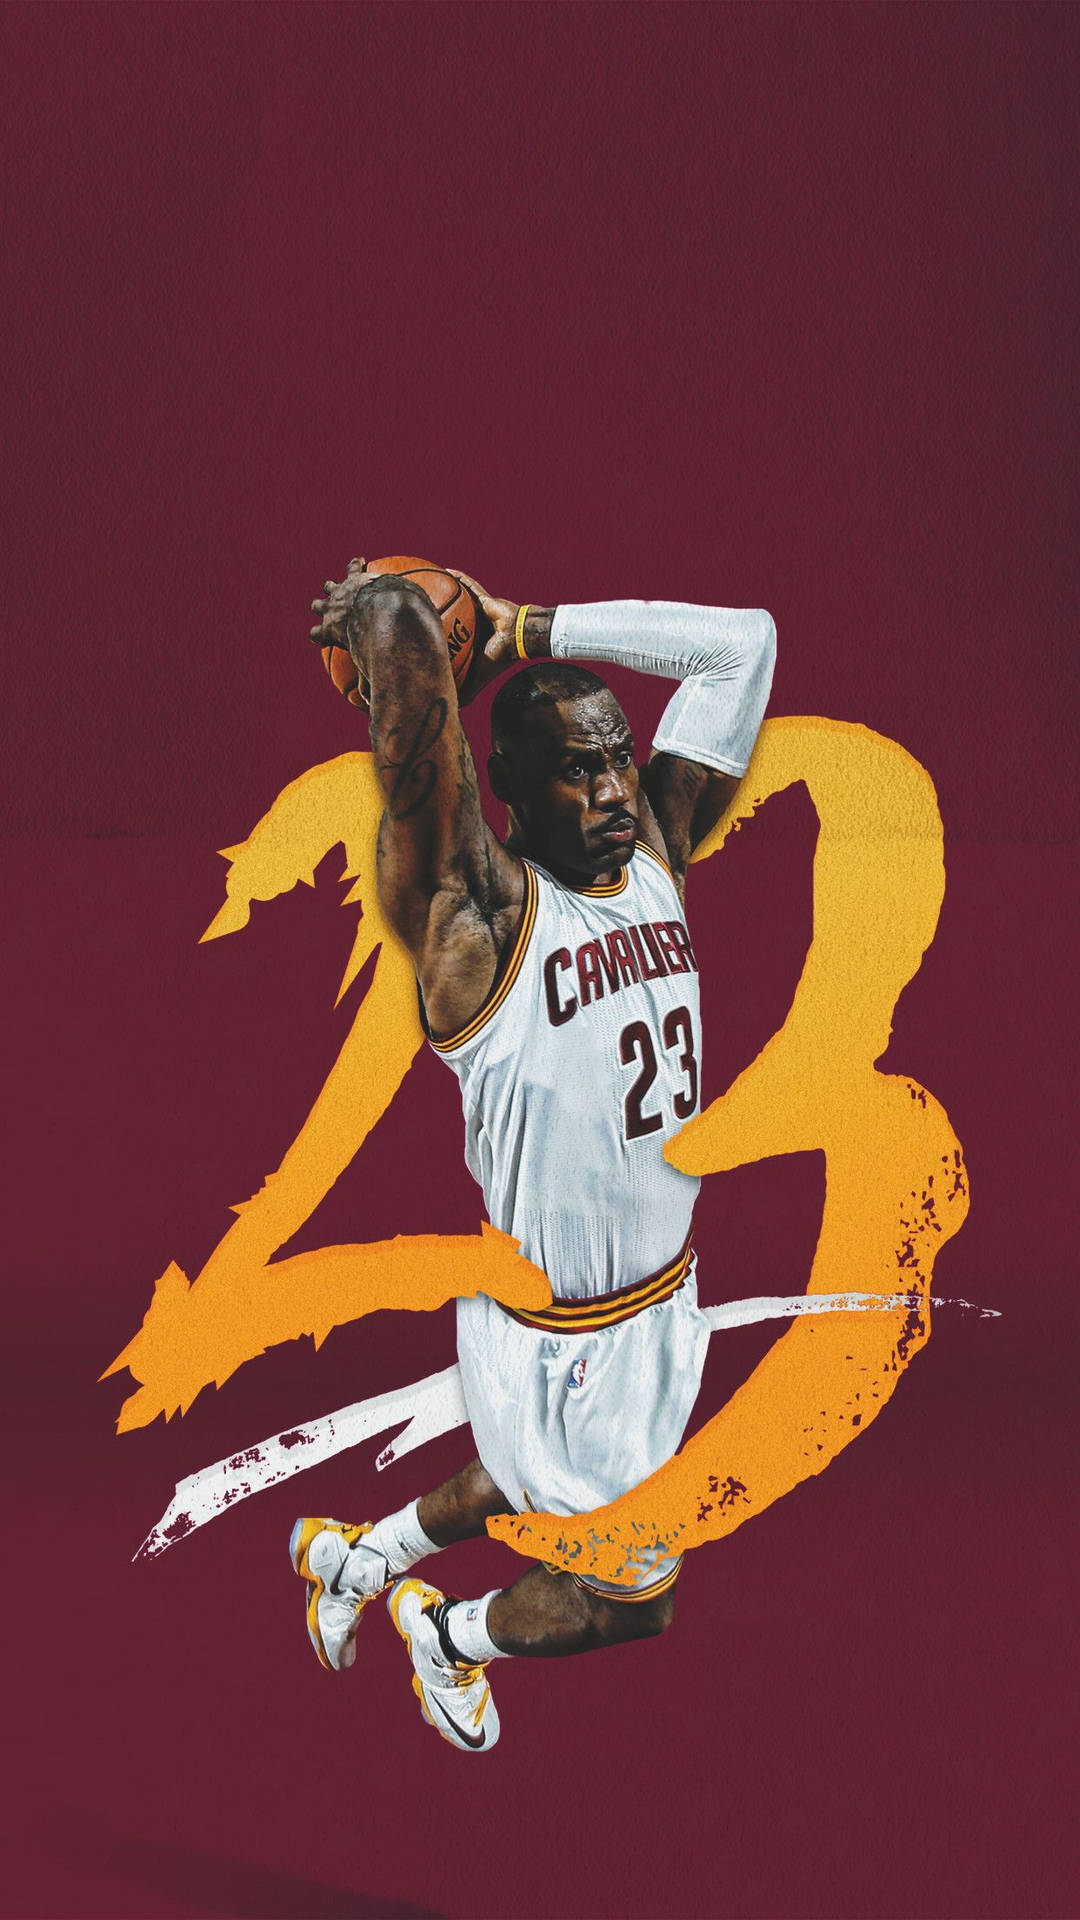 Cool Nba Cavaliers 23 Background